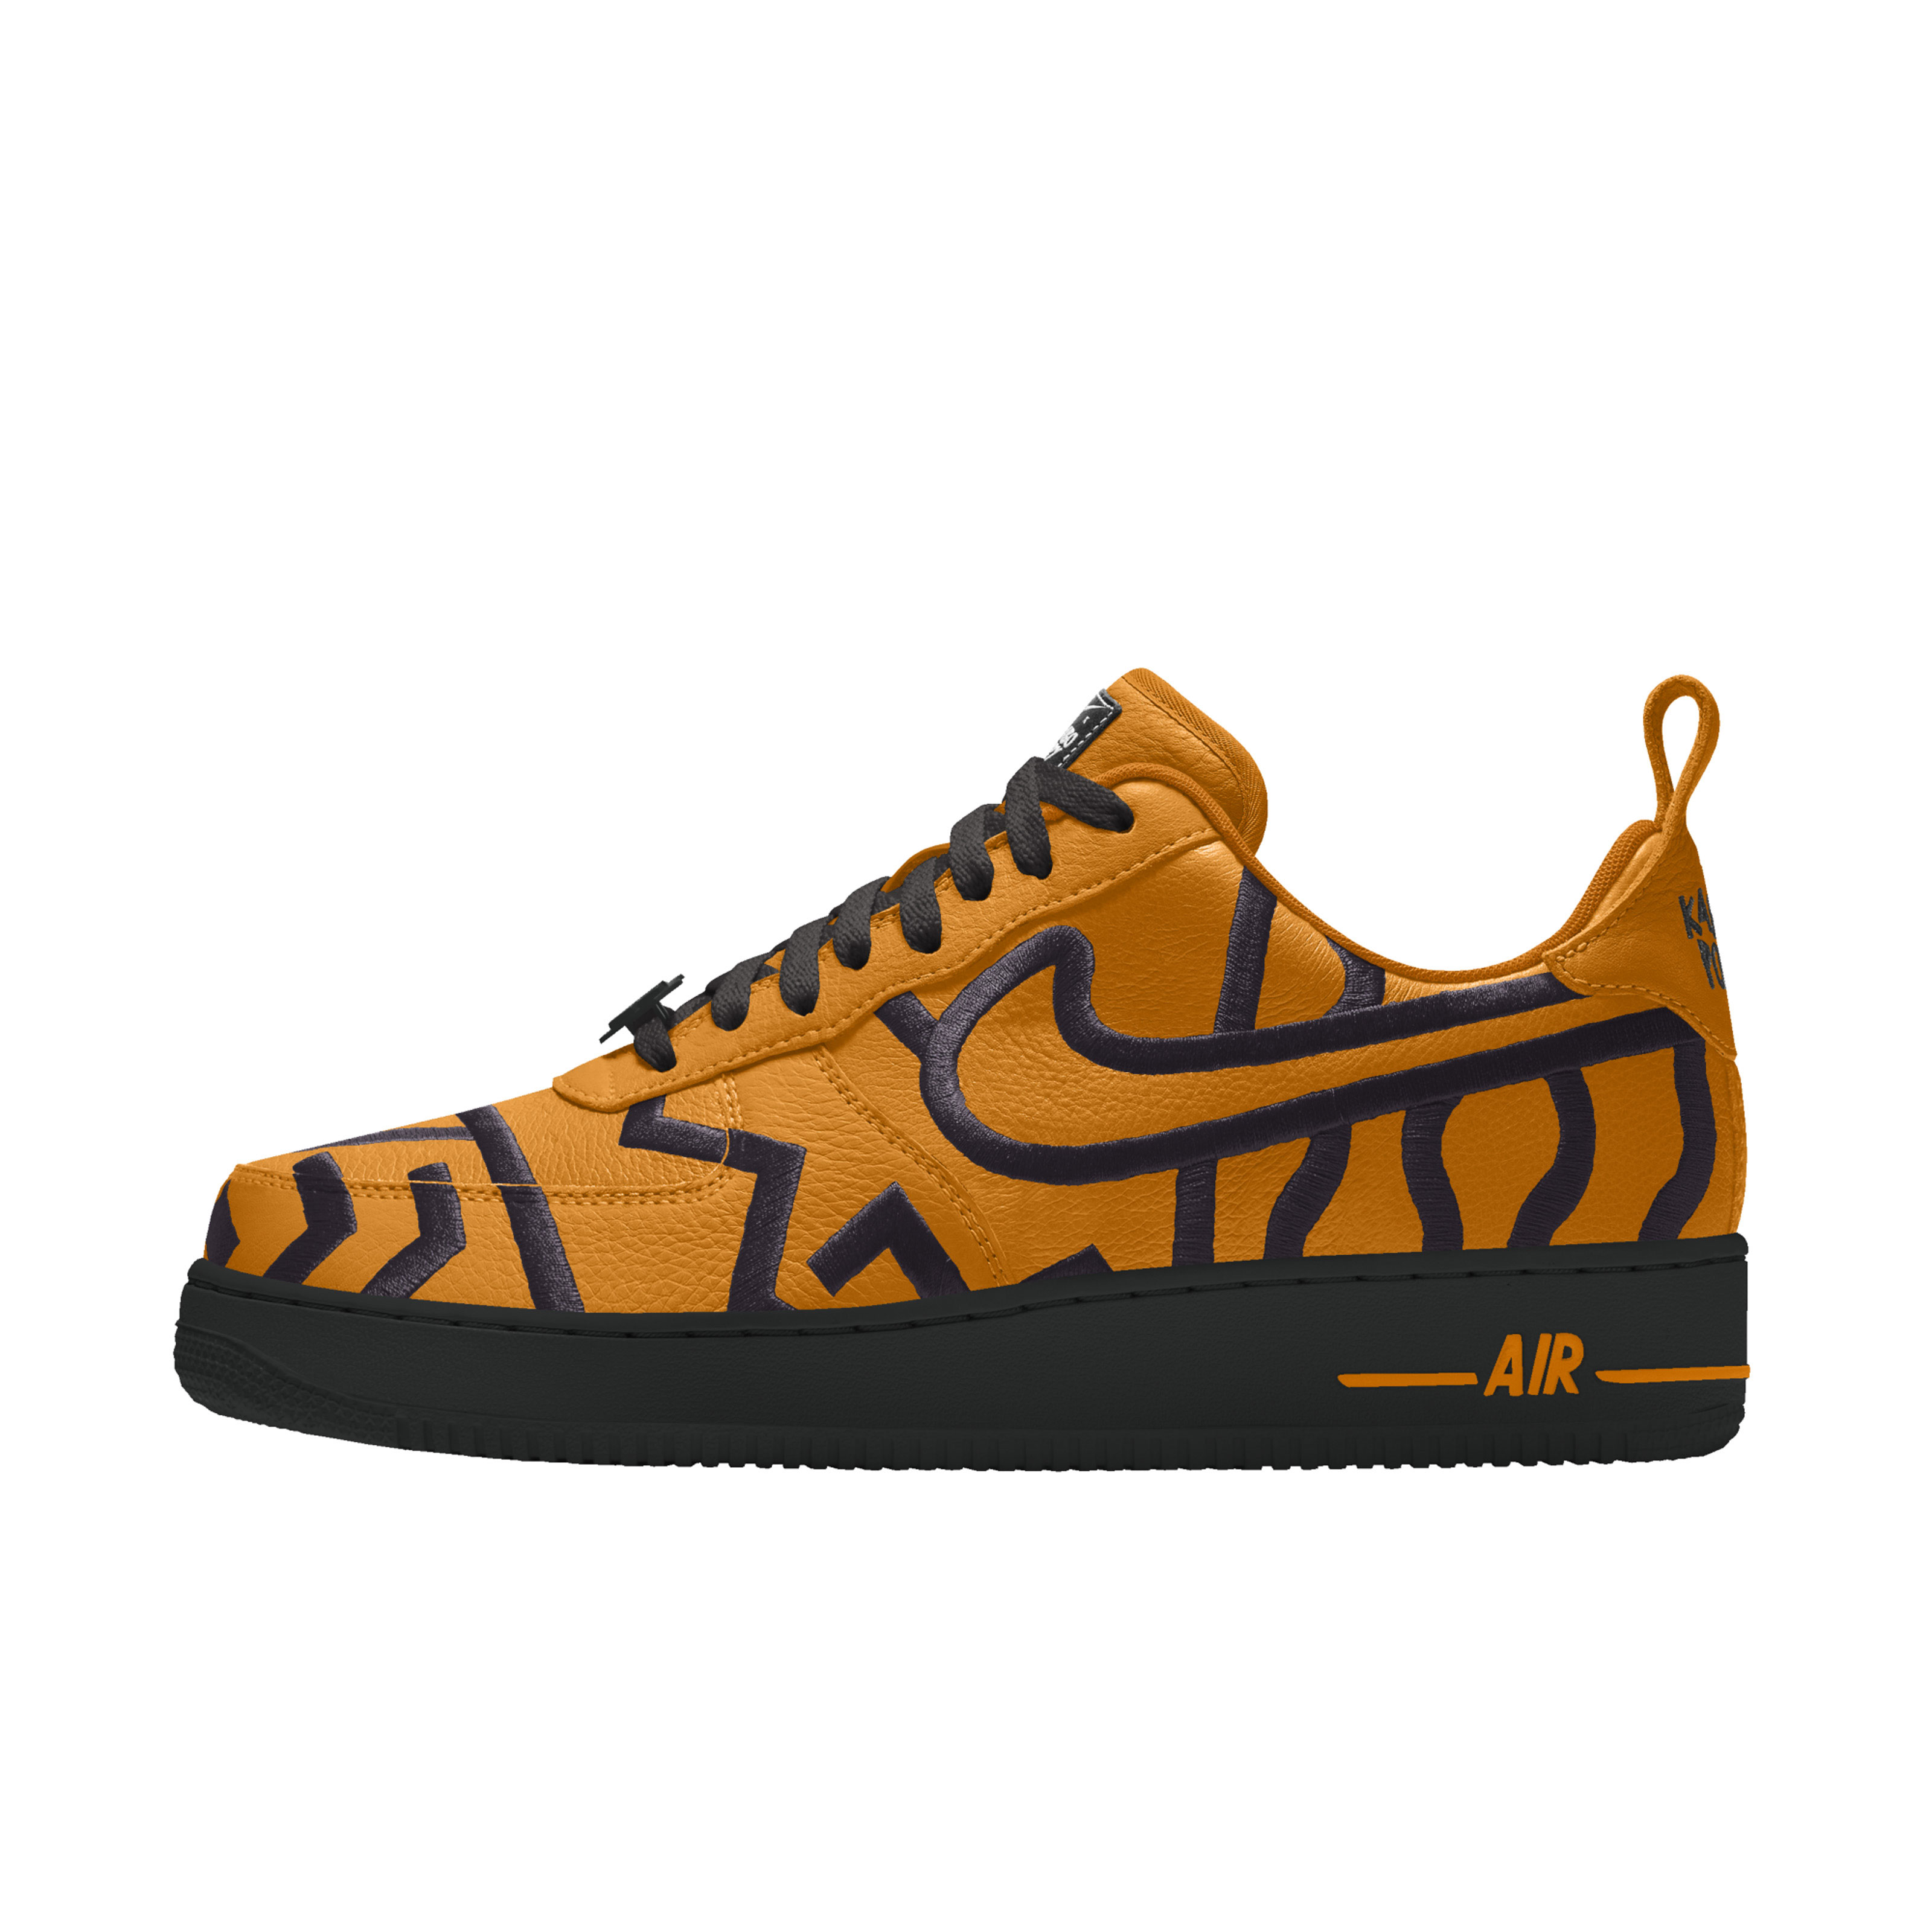 sneakers online south africa